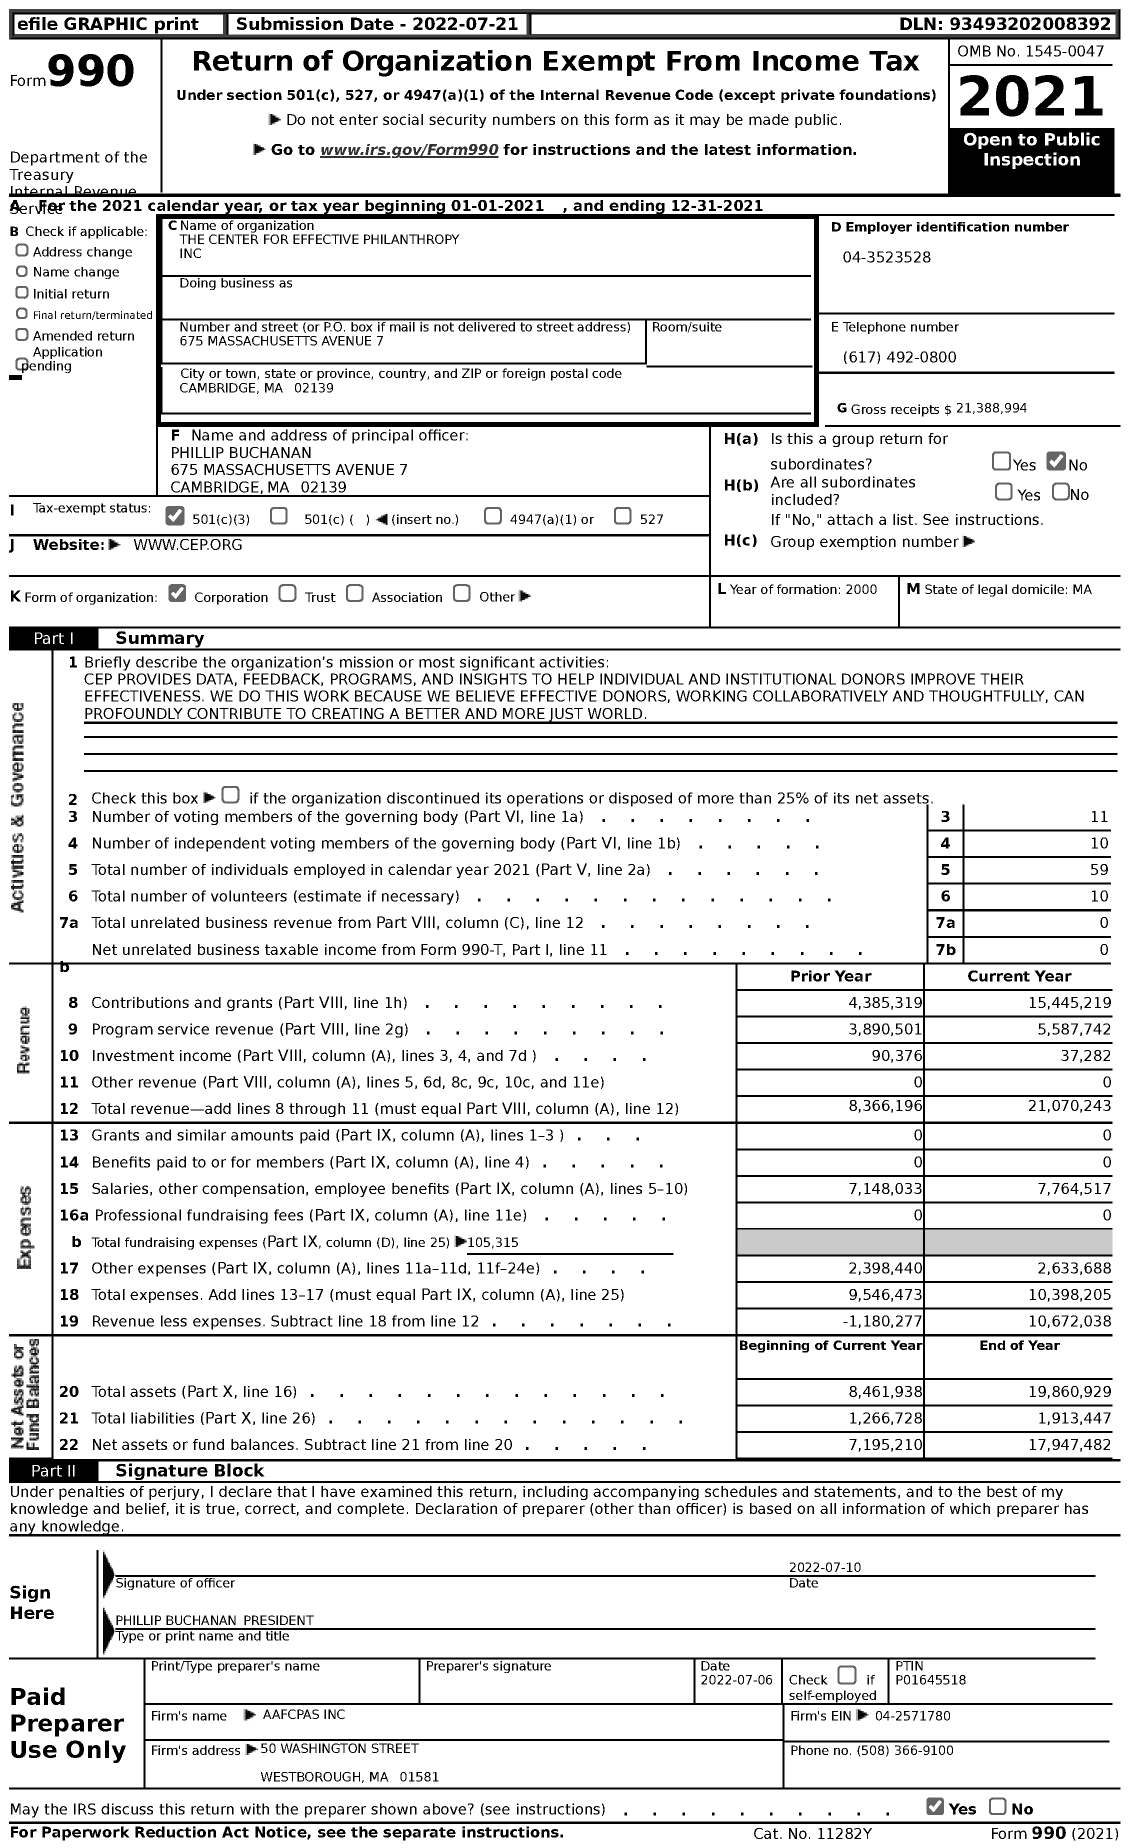 Image of first page of 2021 Form 990 for Center for Effective Philanthropy (CEP)